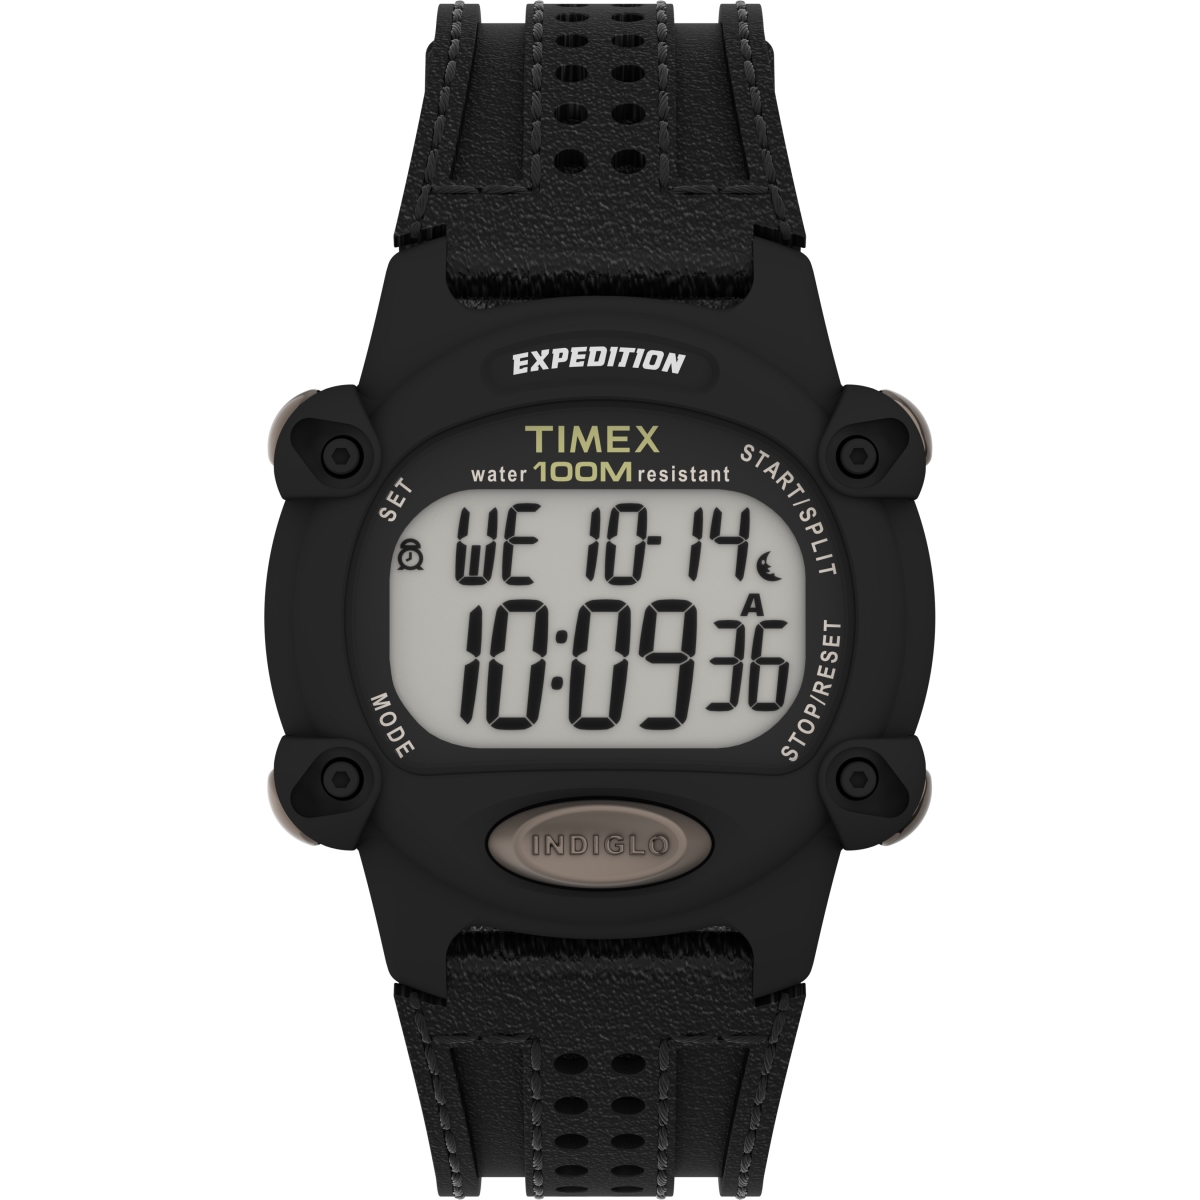 Picture of Timex TW4B204009J 39 mm Men Expedition Black Case Digital CAT Watch with Black Fabric & Leather Strap